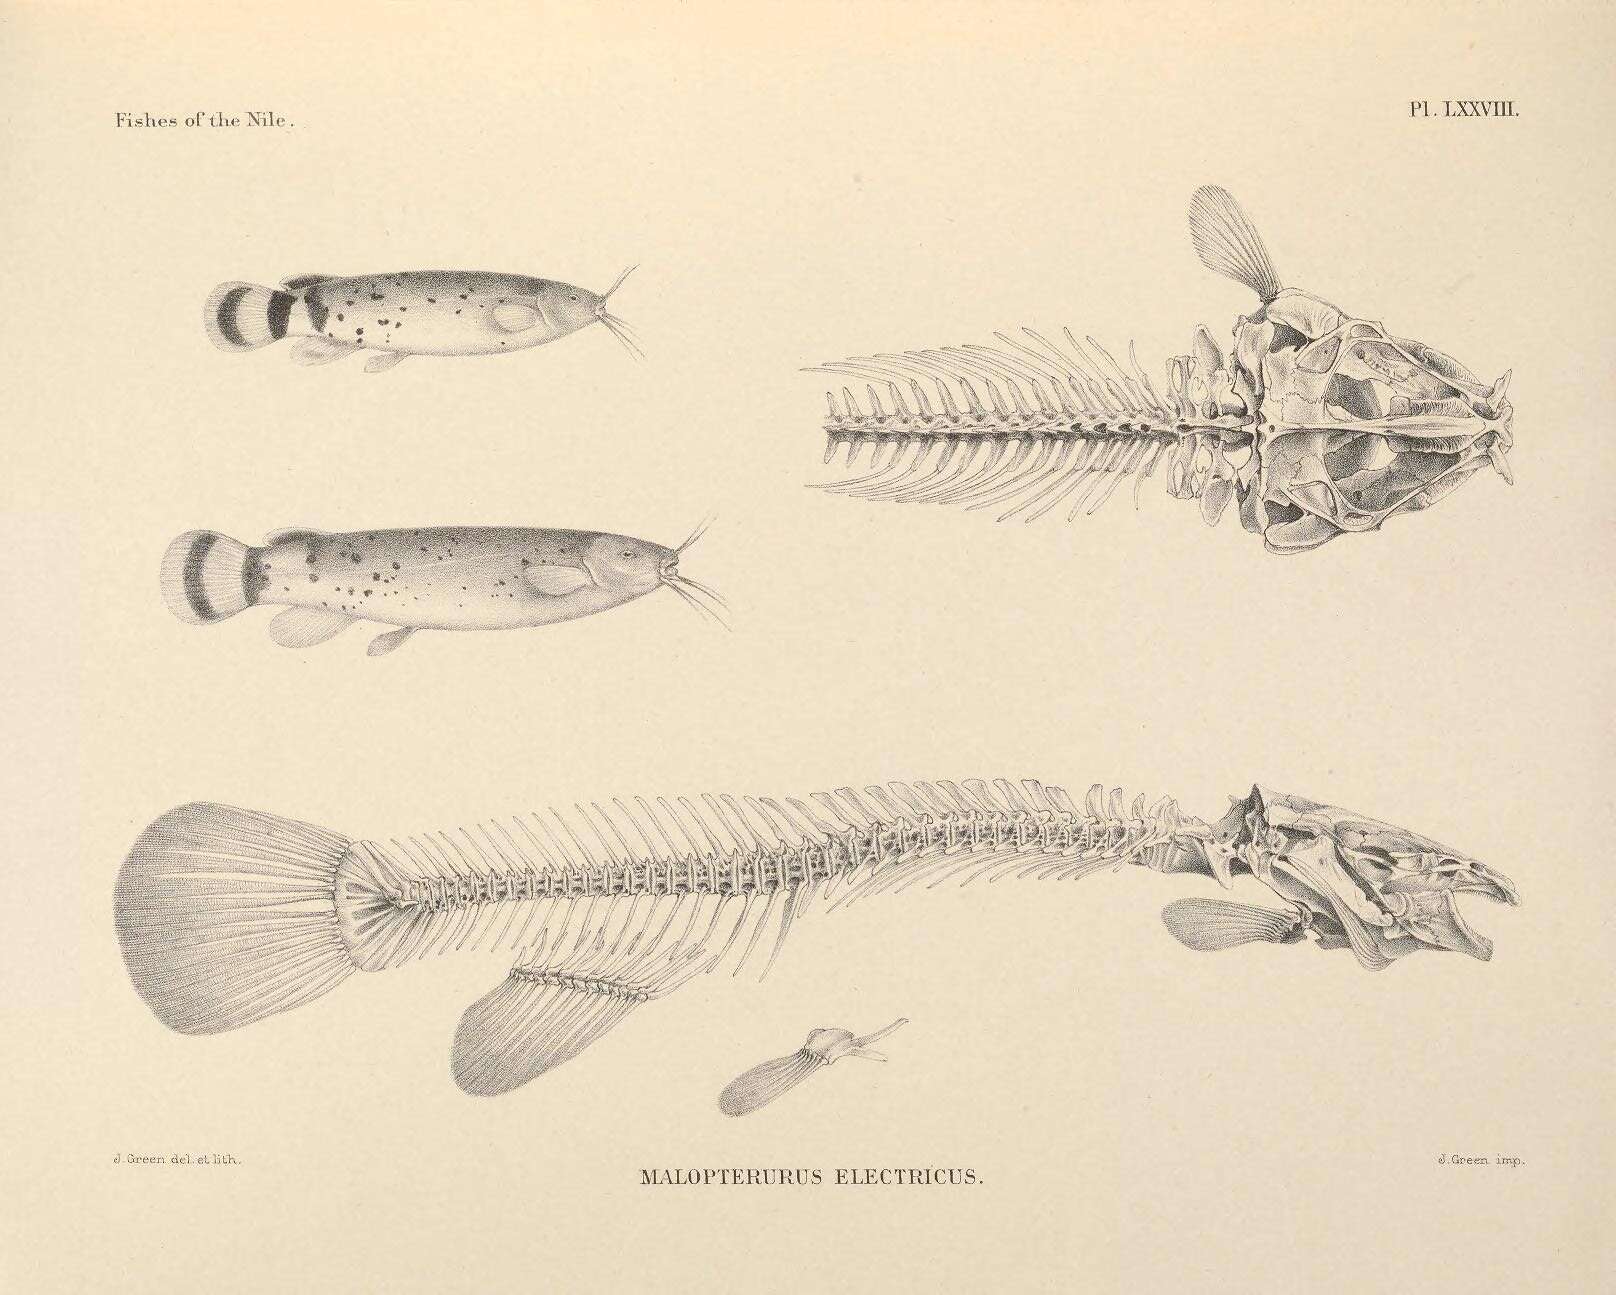 Image of electric catfishes